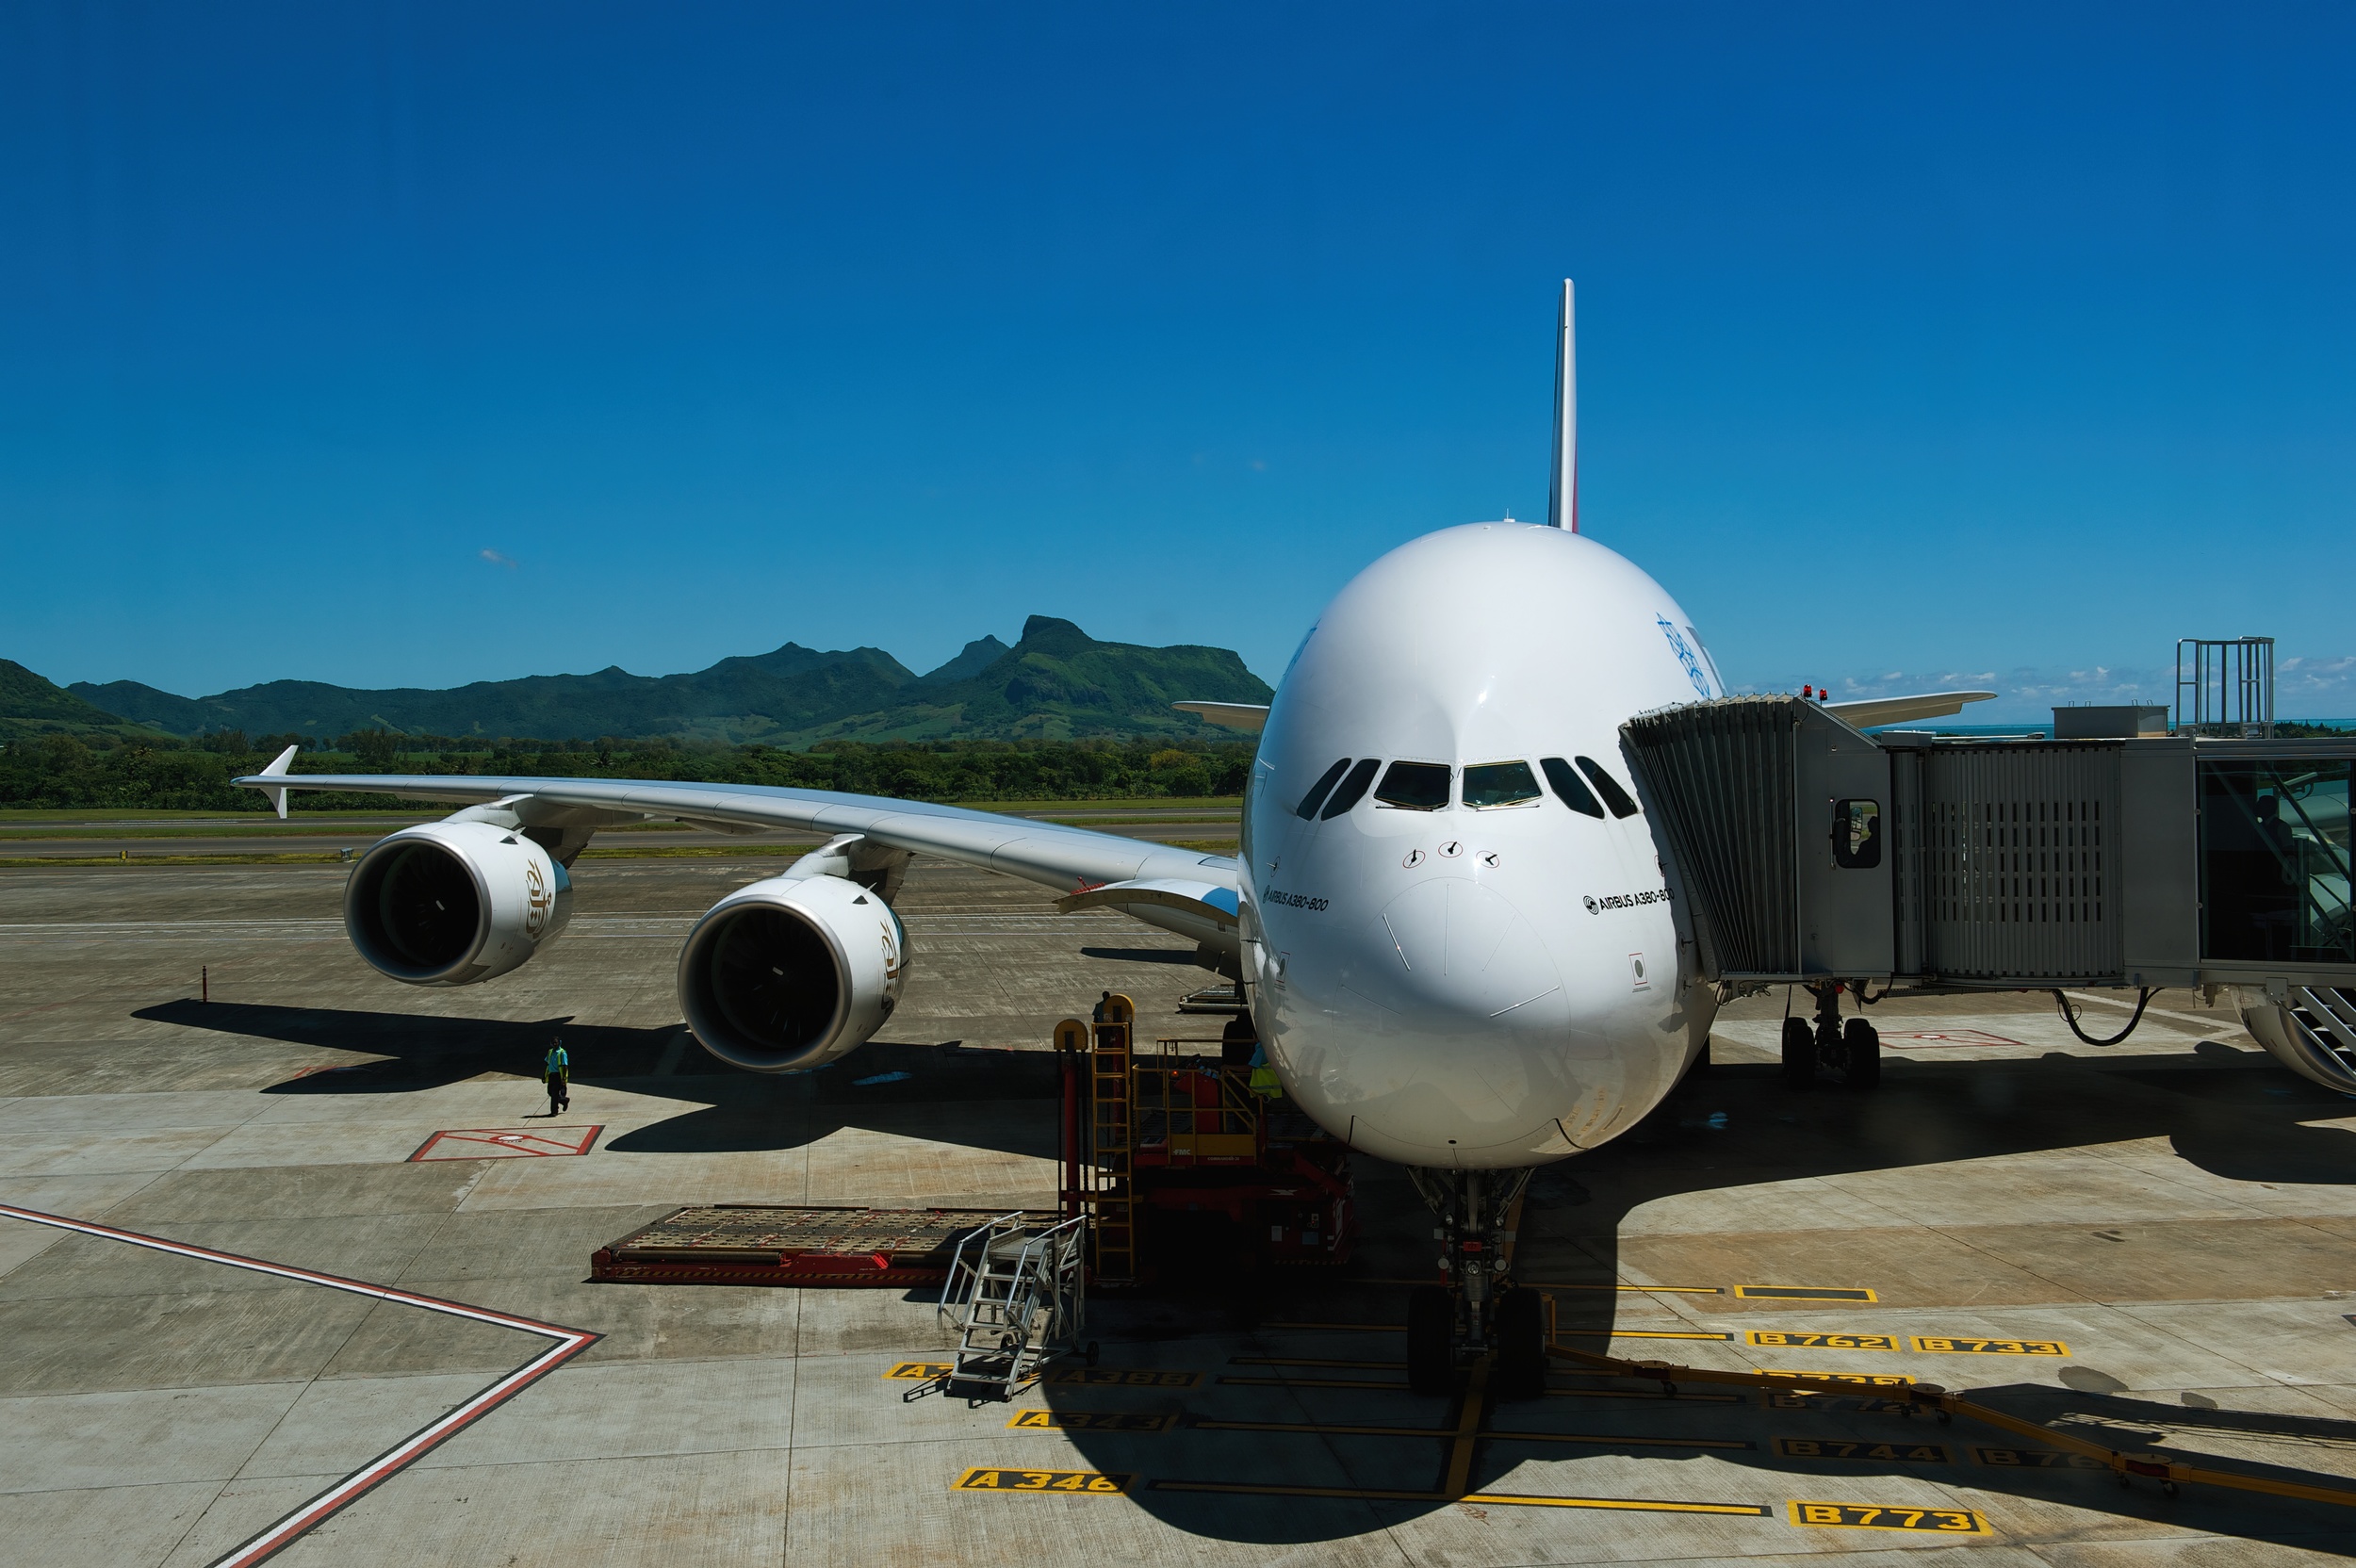  Airbus A380 at the gate in Mauritius, Plaisance Airport. 